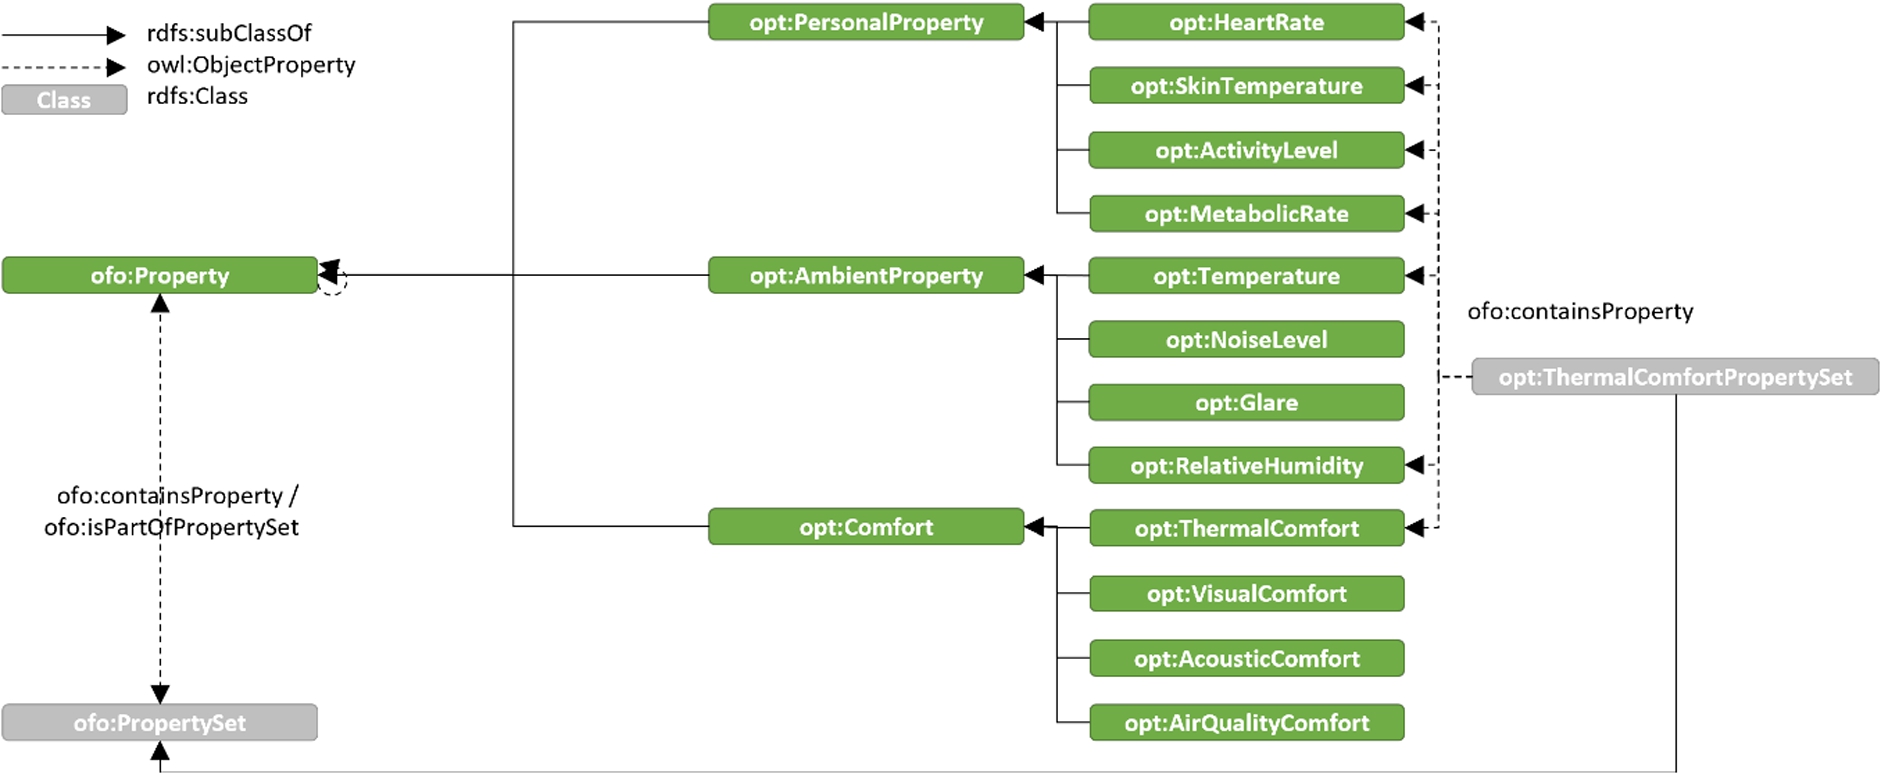 Snippet of the Occupant Property Taxonomy as a subclass of ofo:Property.